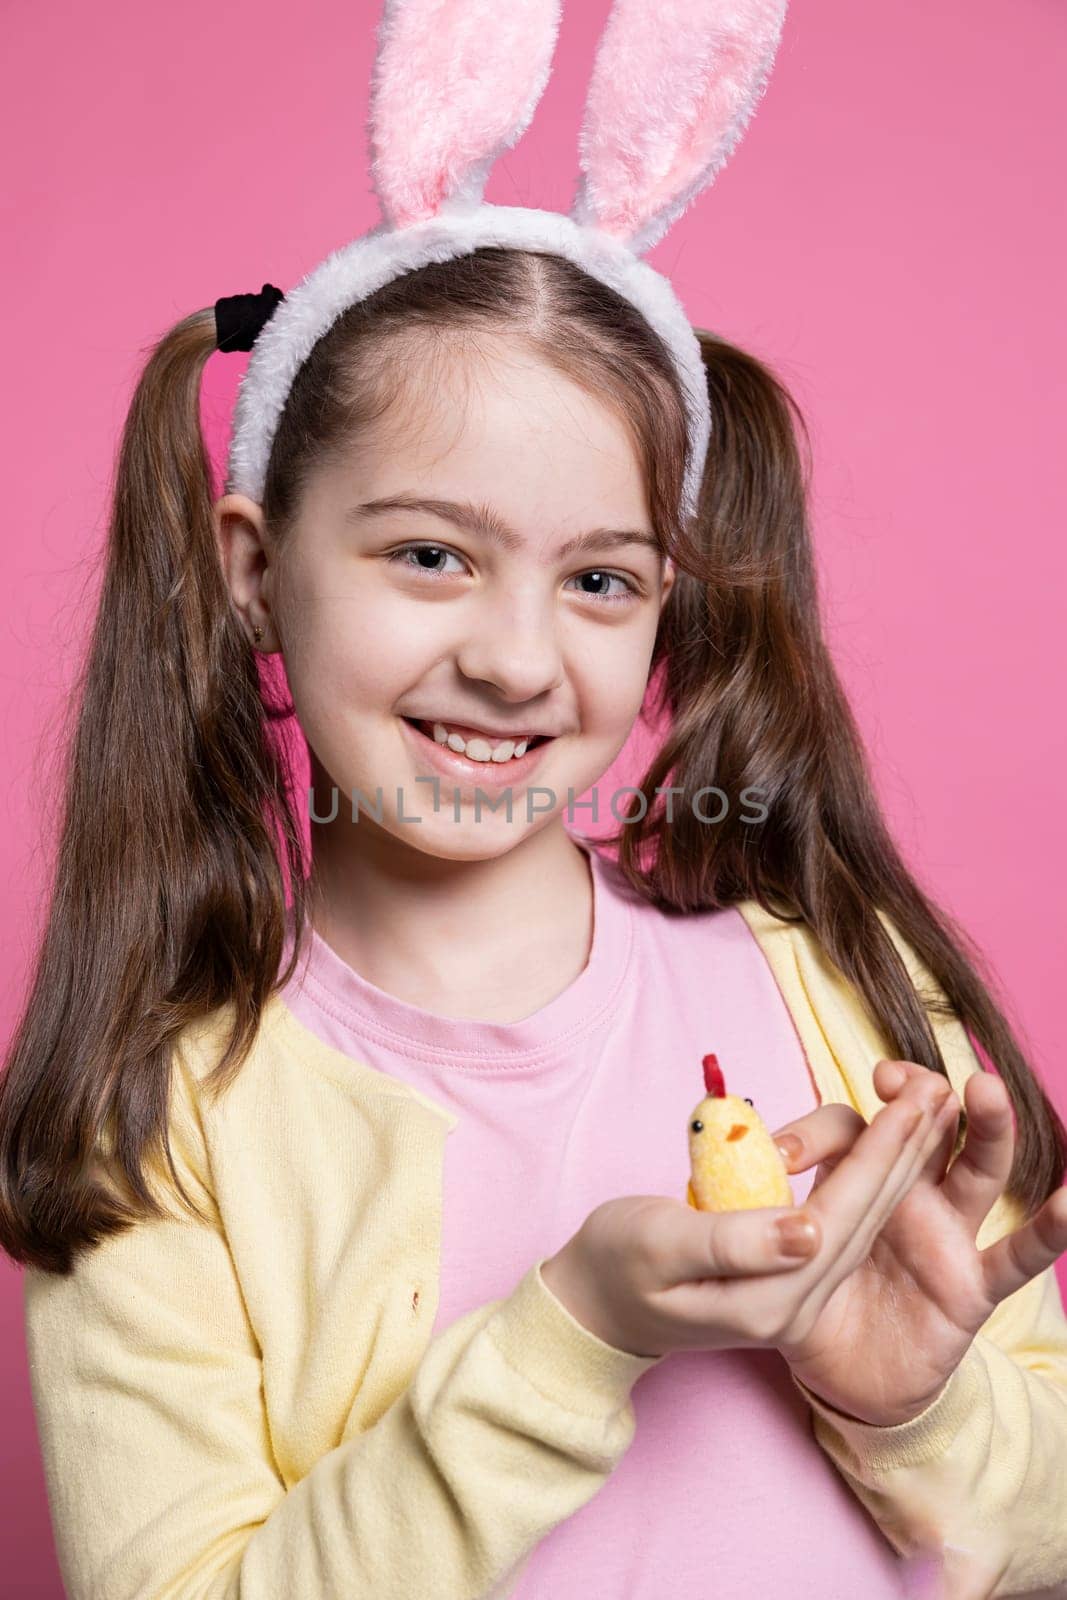 Young cute kid holding a stuffed chick in front of camera, positive excited girl feeling happy about easter celebrations. Small child with fluffy bunny ears smiling over pink background.